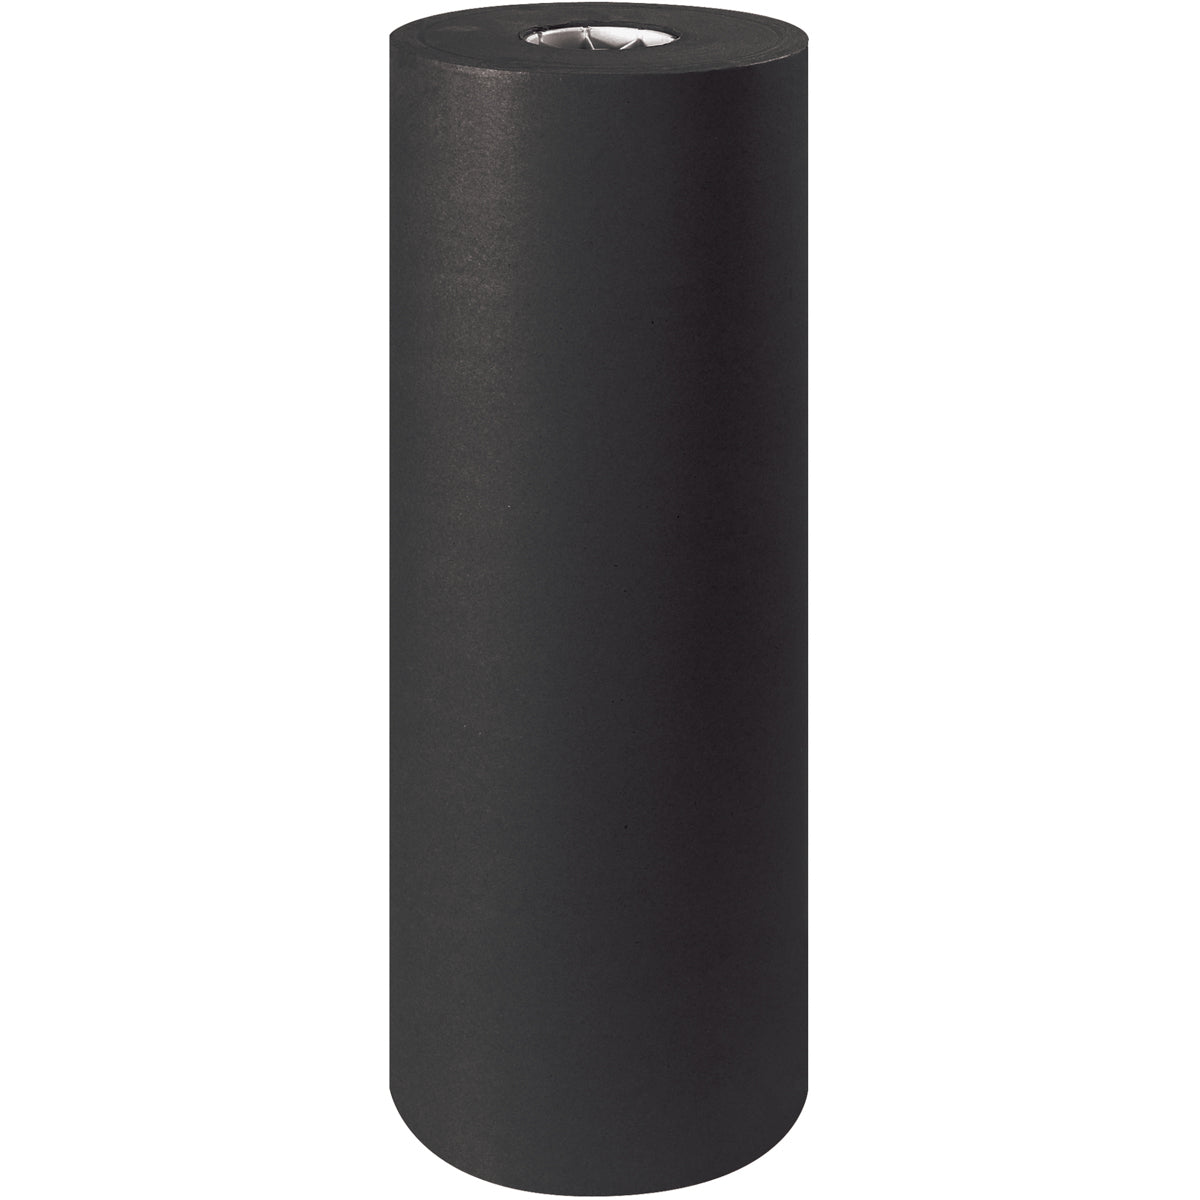  CertBuy Black Kraft Paper Roll 12 Inch x 164 Feet Black  Bulletin Board Paper Recyclable Craft Paper for Packing, Gift  Wrapping,Shipping, Parcel, Wall Art, Crafts, Bulletin Boards, Floor Covering